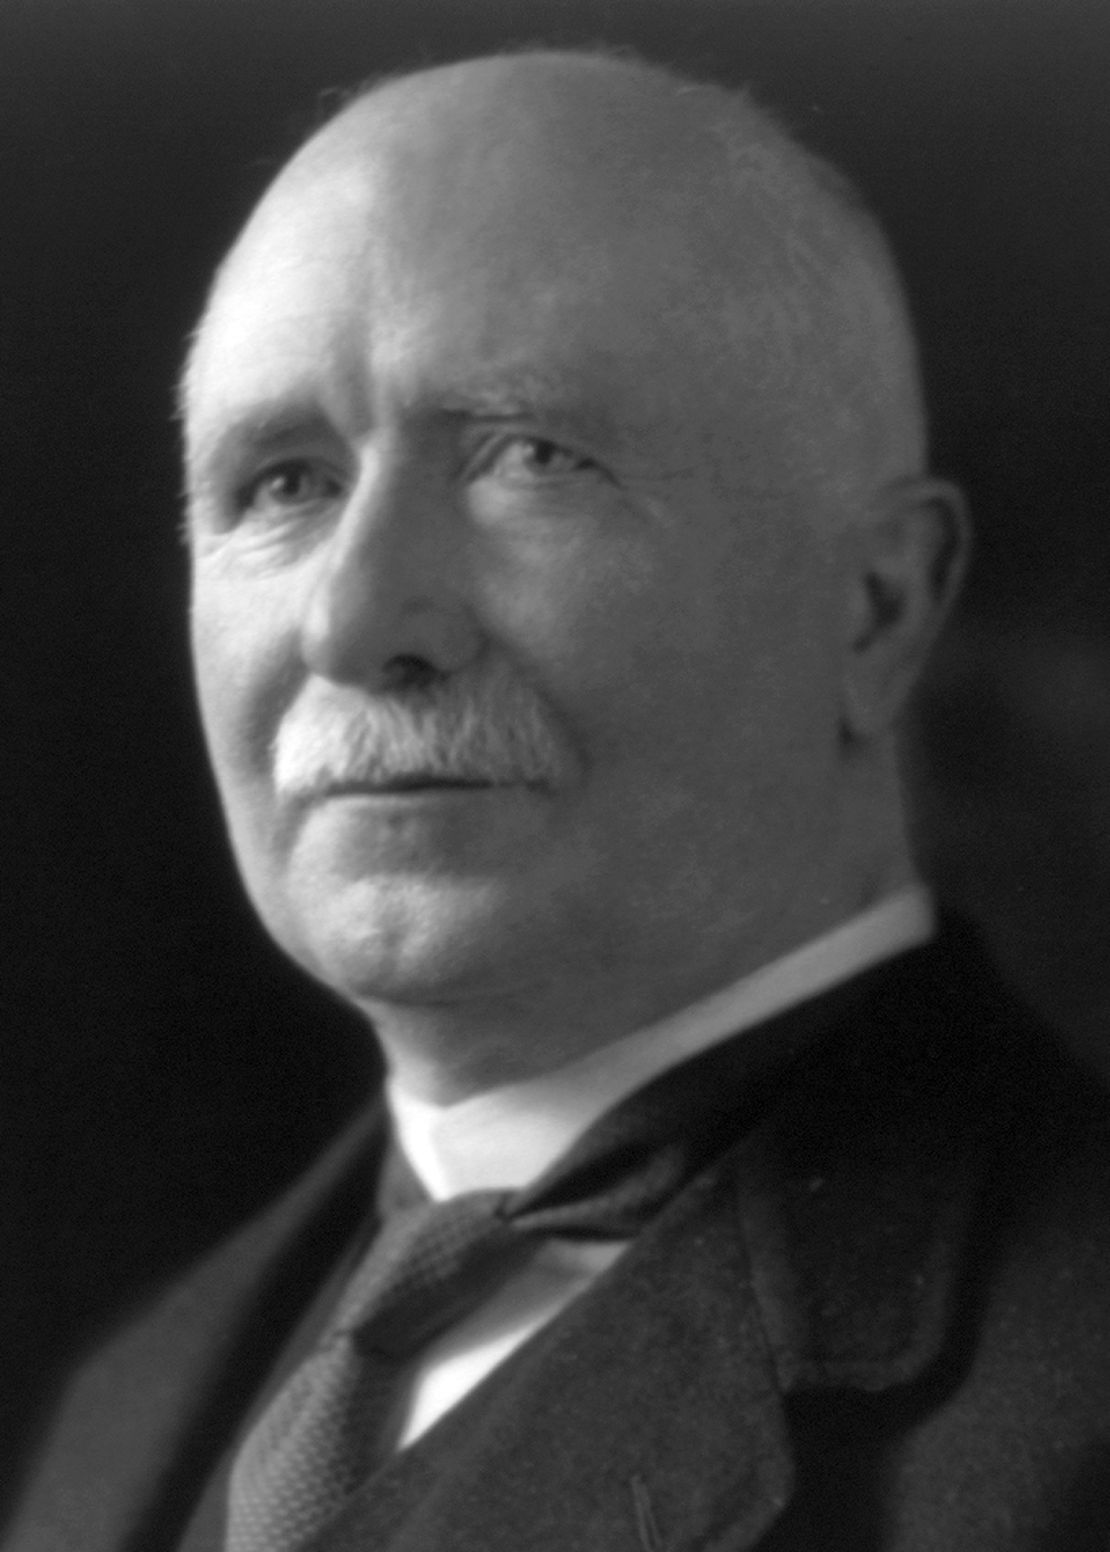 William Massey, New Zealand Prime Minister, is born in Londonderry